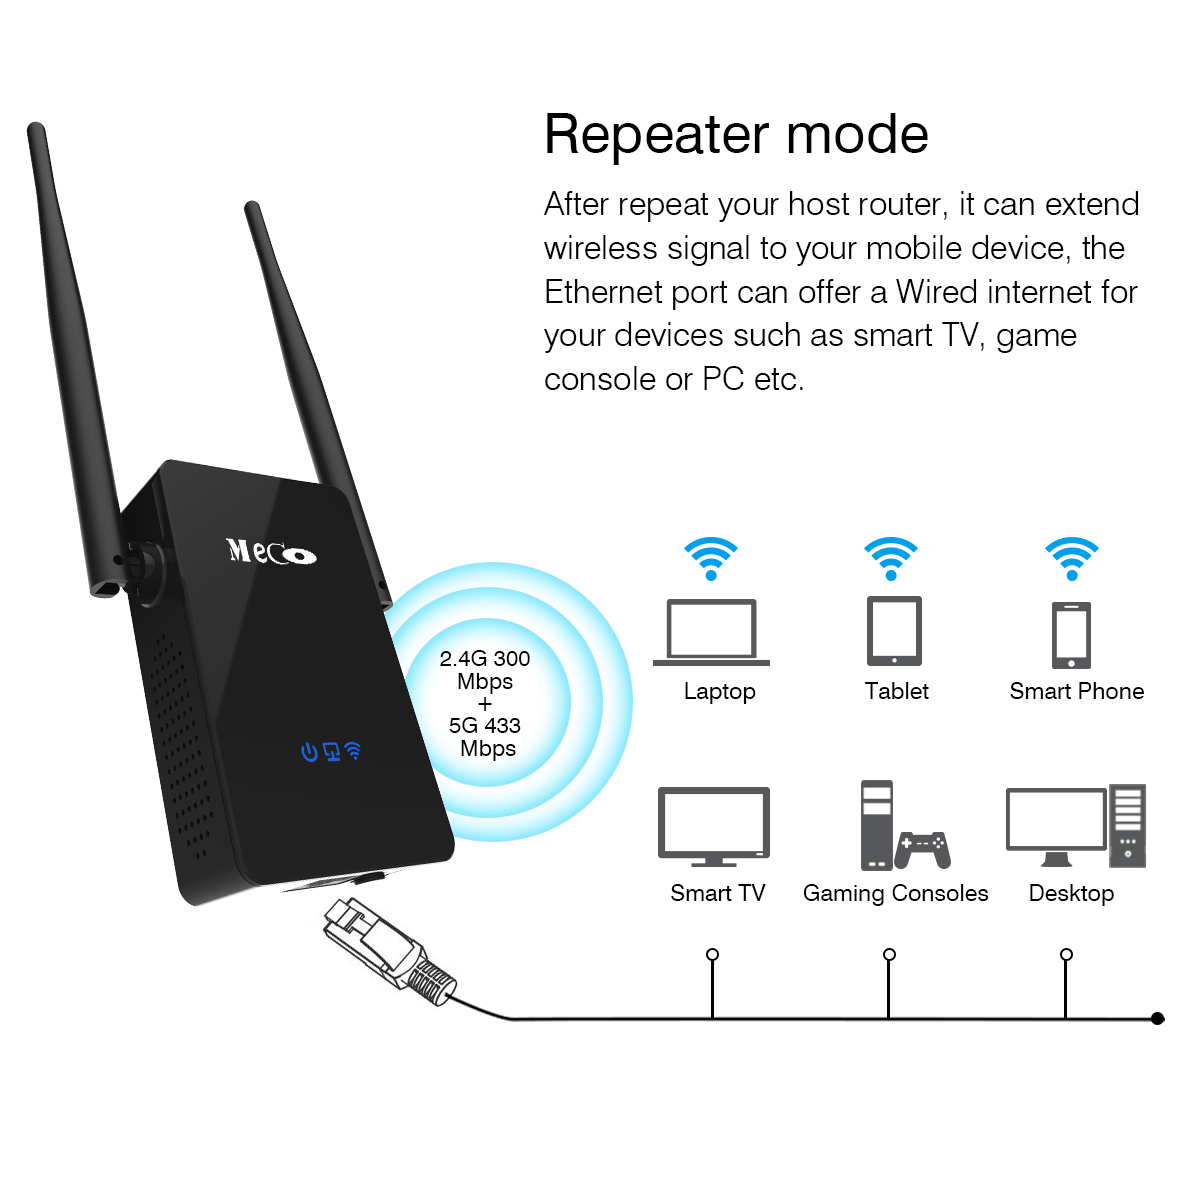 MECO-AC750-750Mbps-Dual-Band-24G-58G-WiFi-Repeater-Signal-Extender-Support-Repeater-AP-Router-Mode-1216792